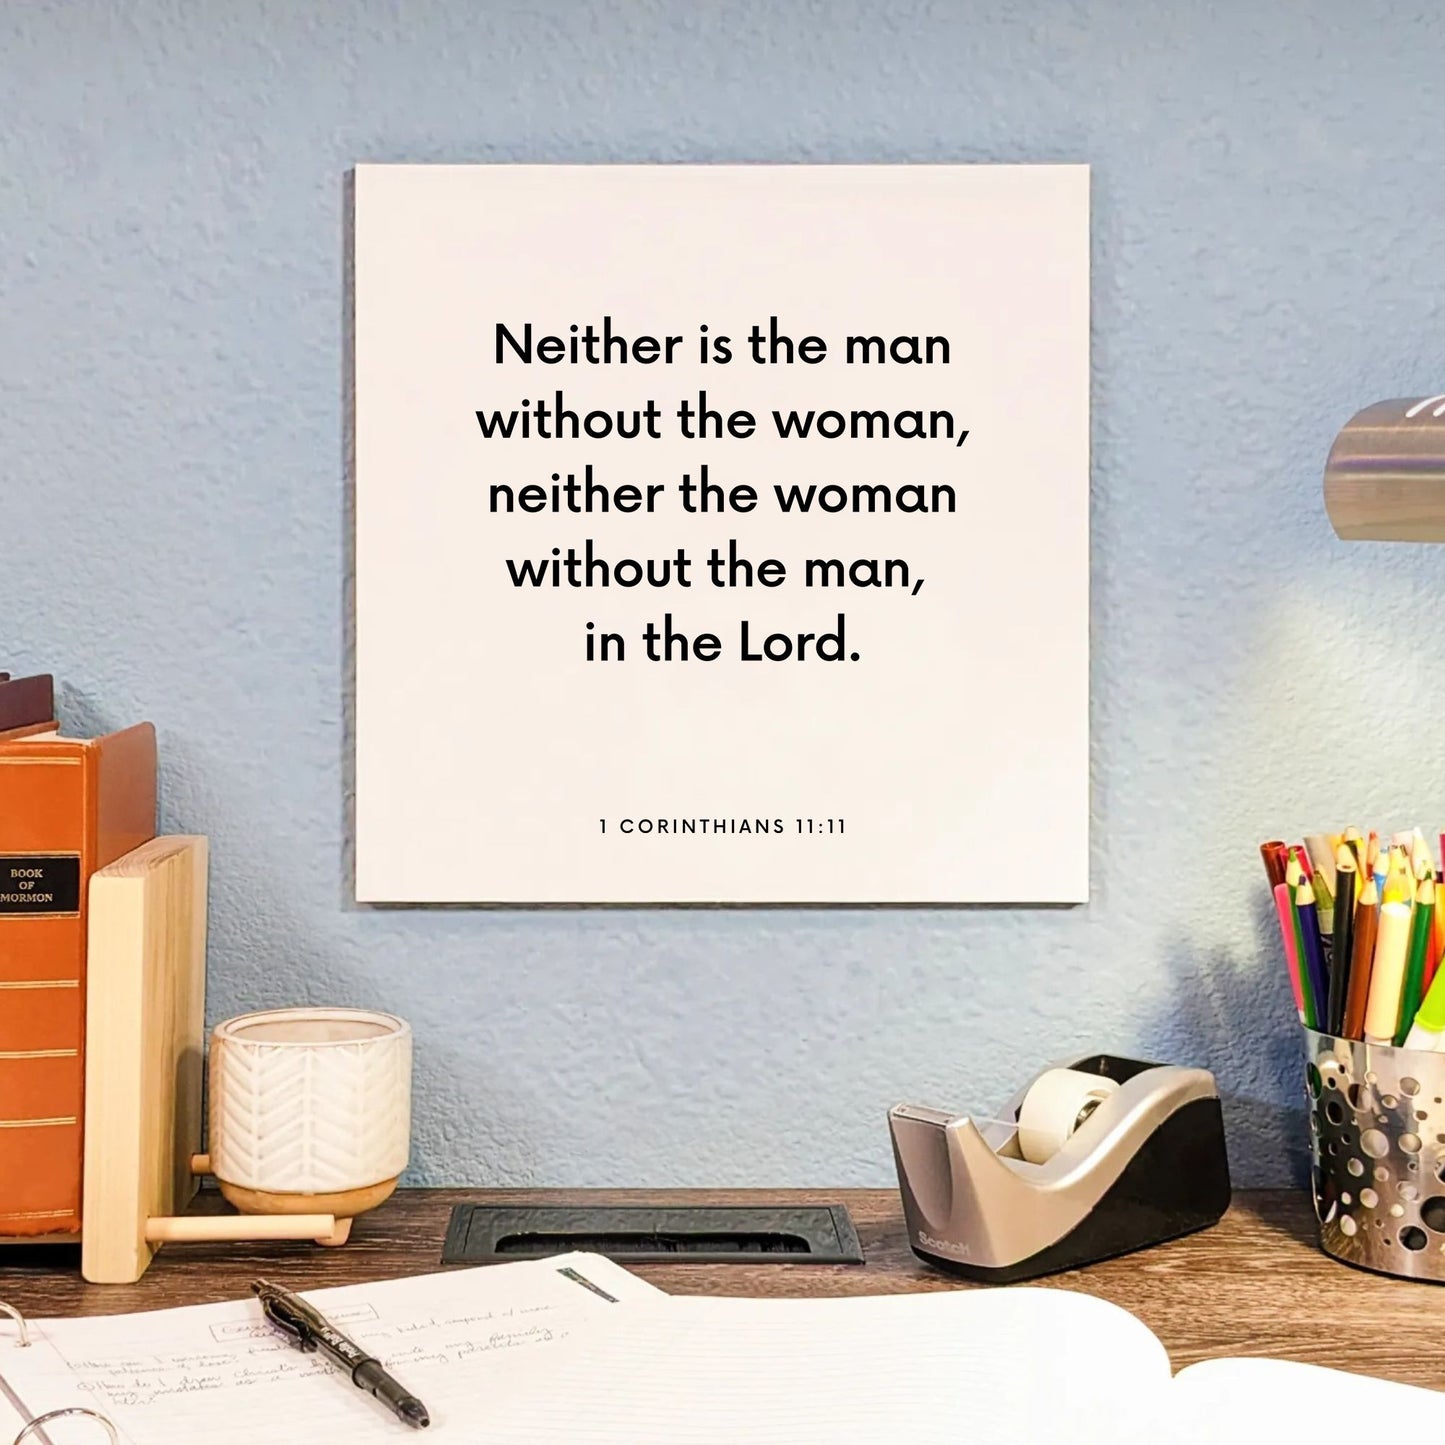 Desk mouting of the scripture tile for 1 Corinthians 11:11 - "Neither is the man without the woman, in the lord"